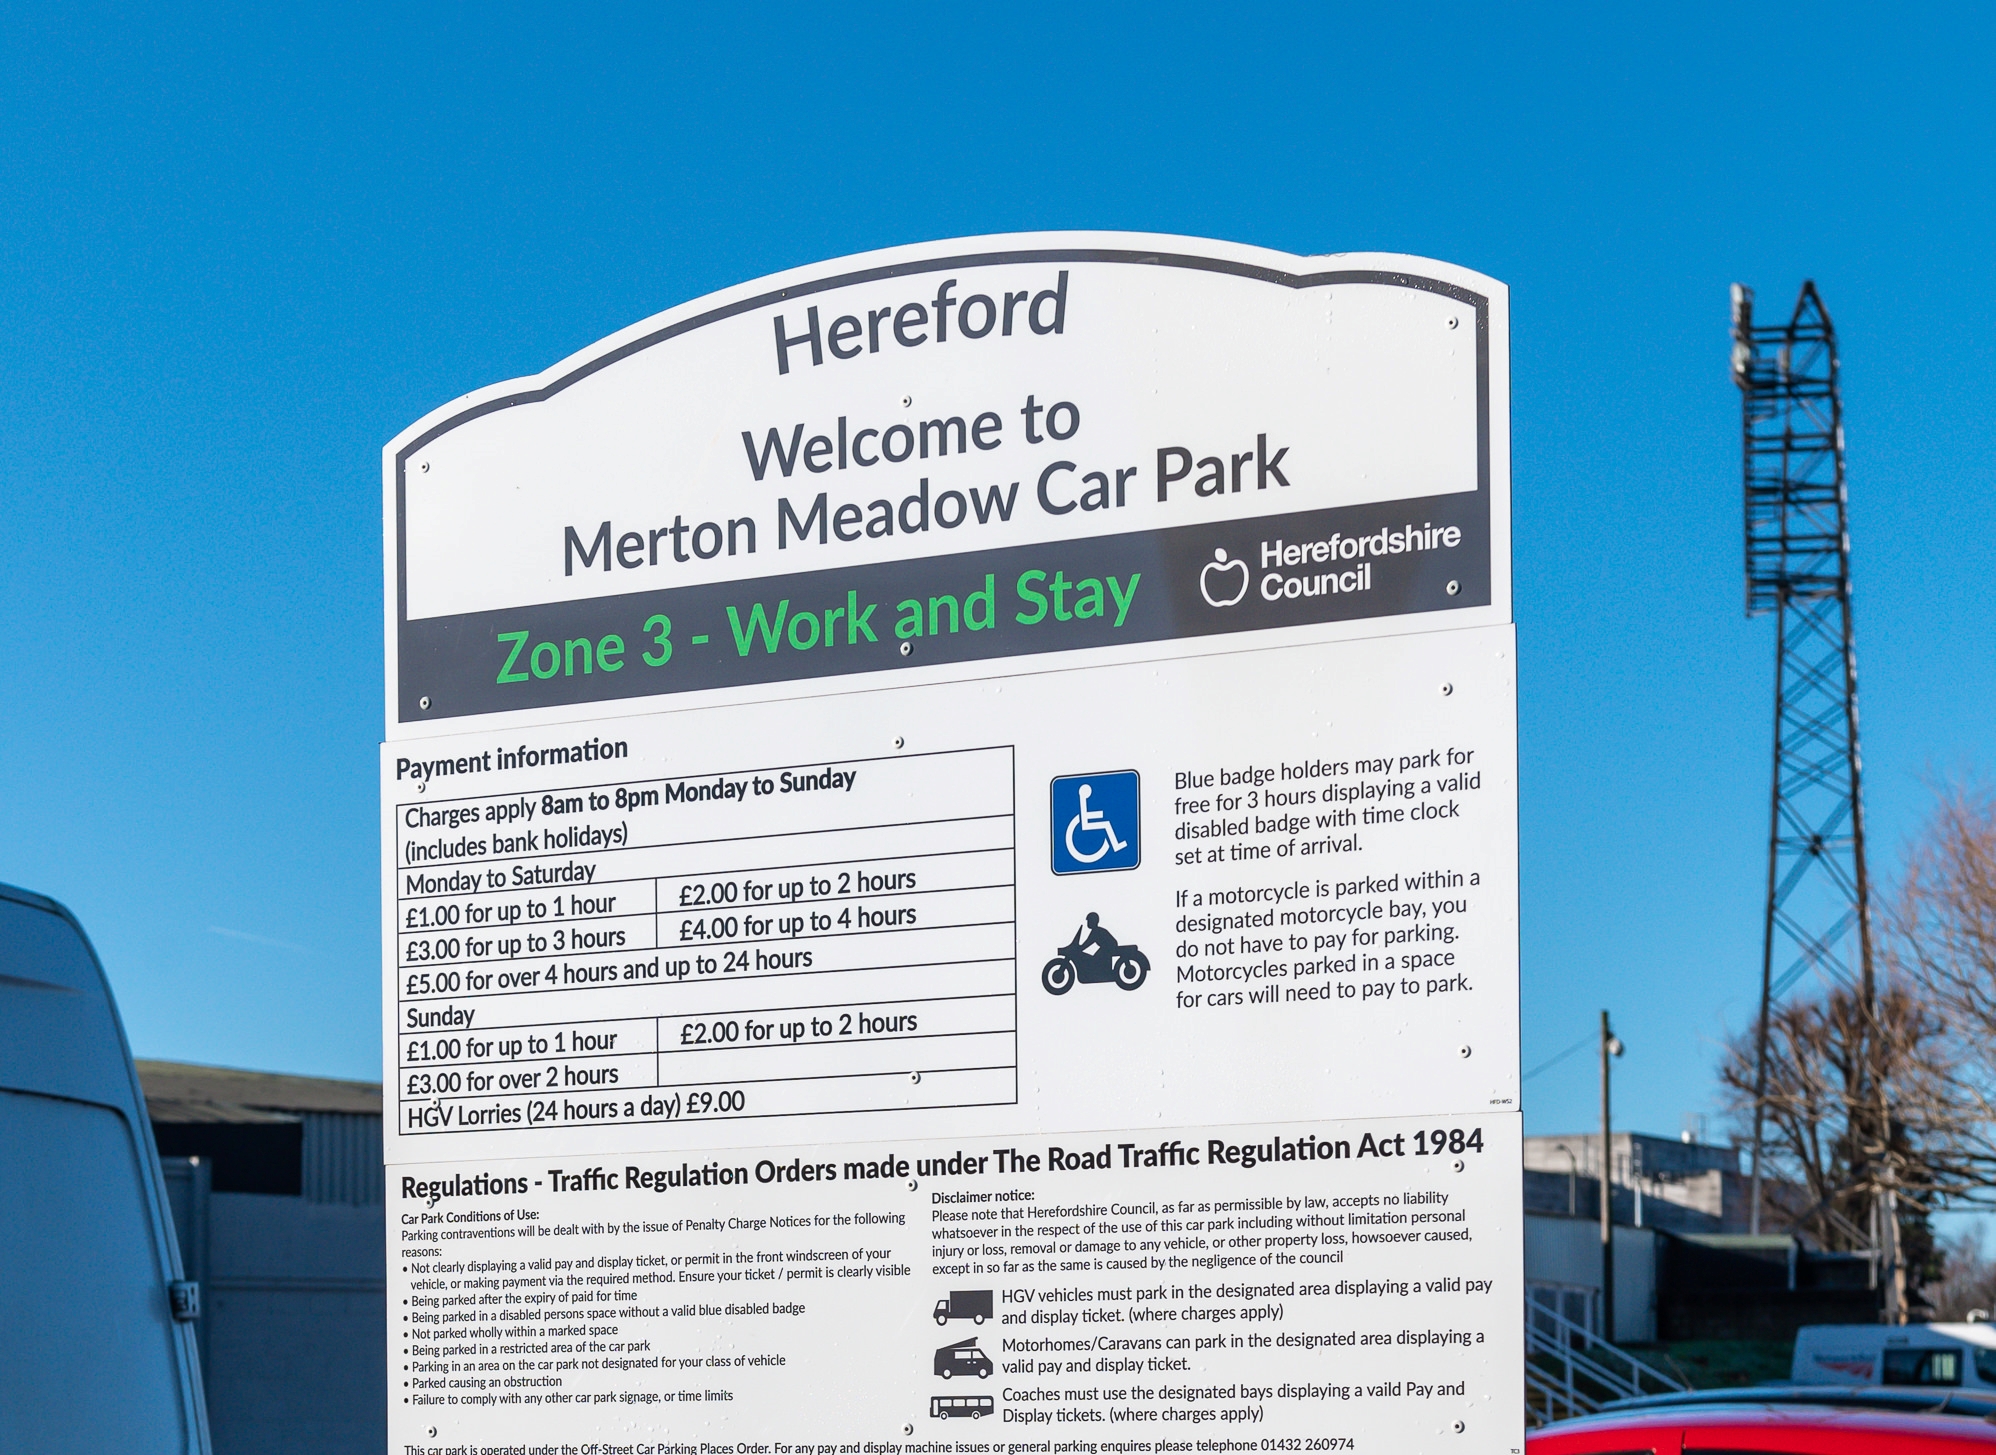 REVEALED | The amount that Herefordshire Council has made from parking fines over the past three years